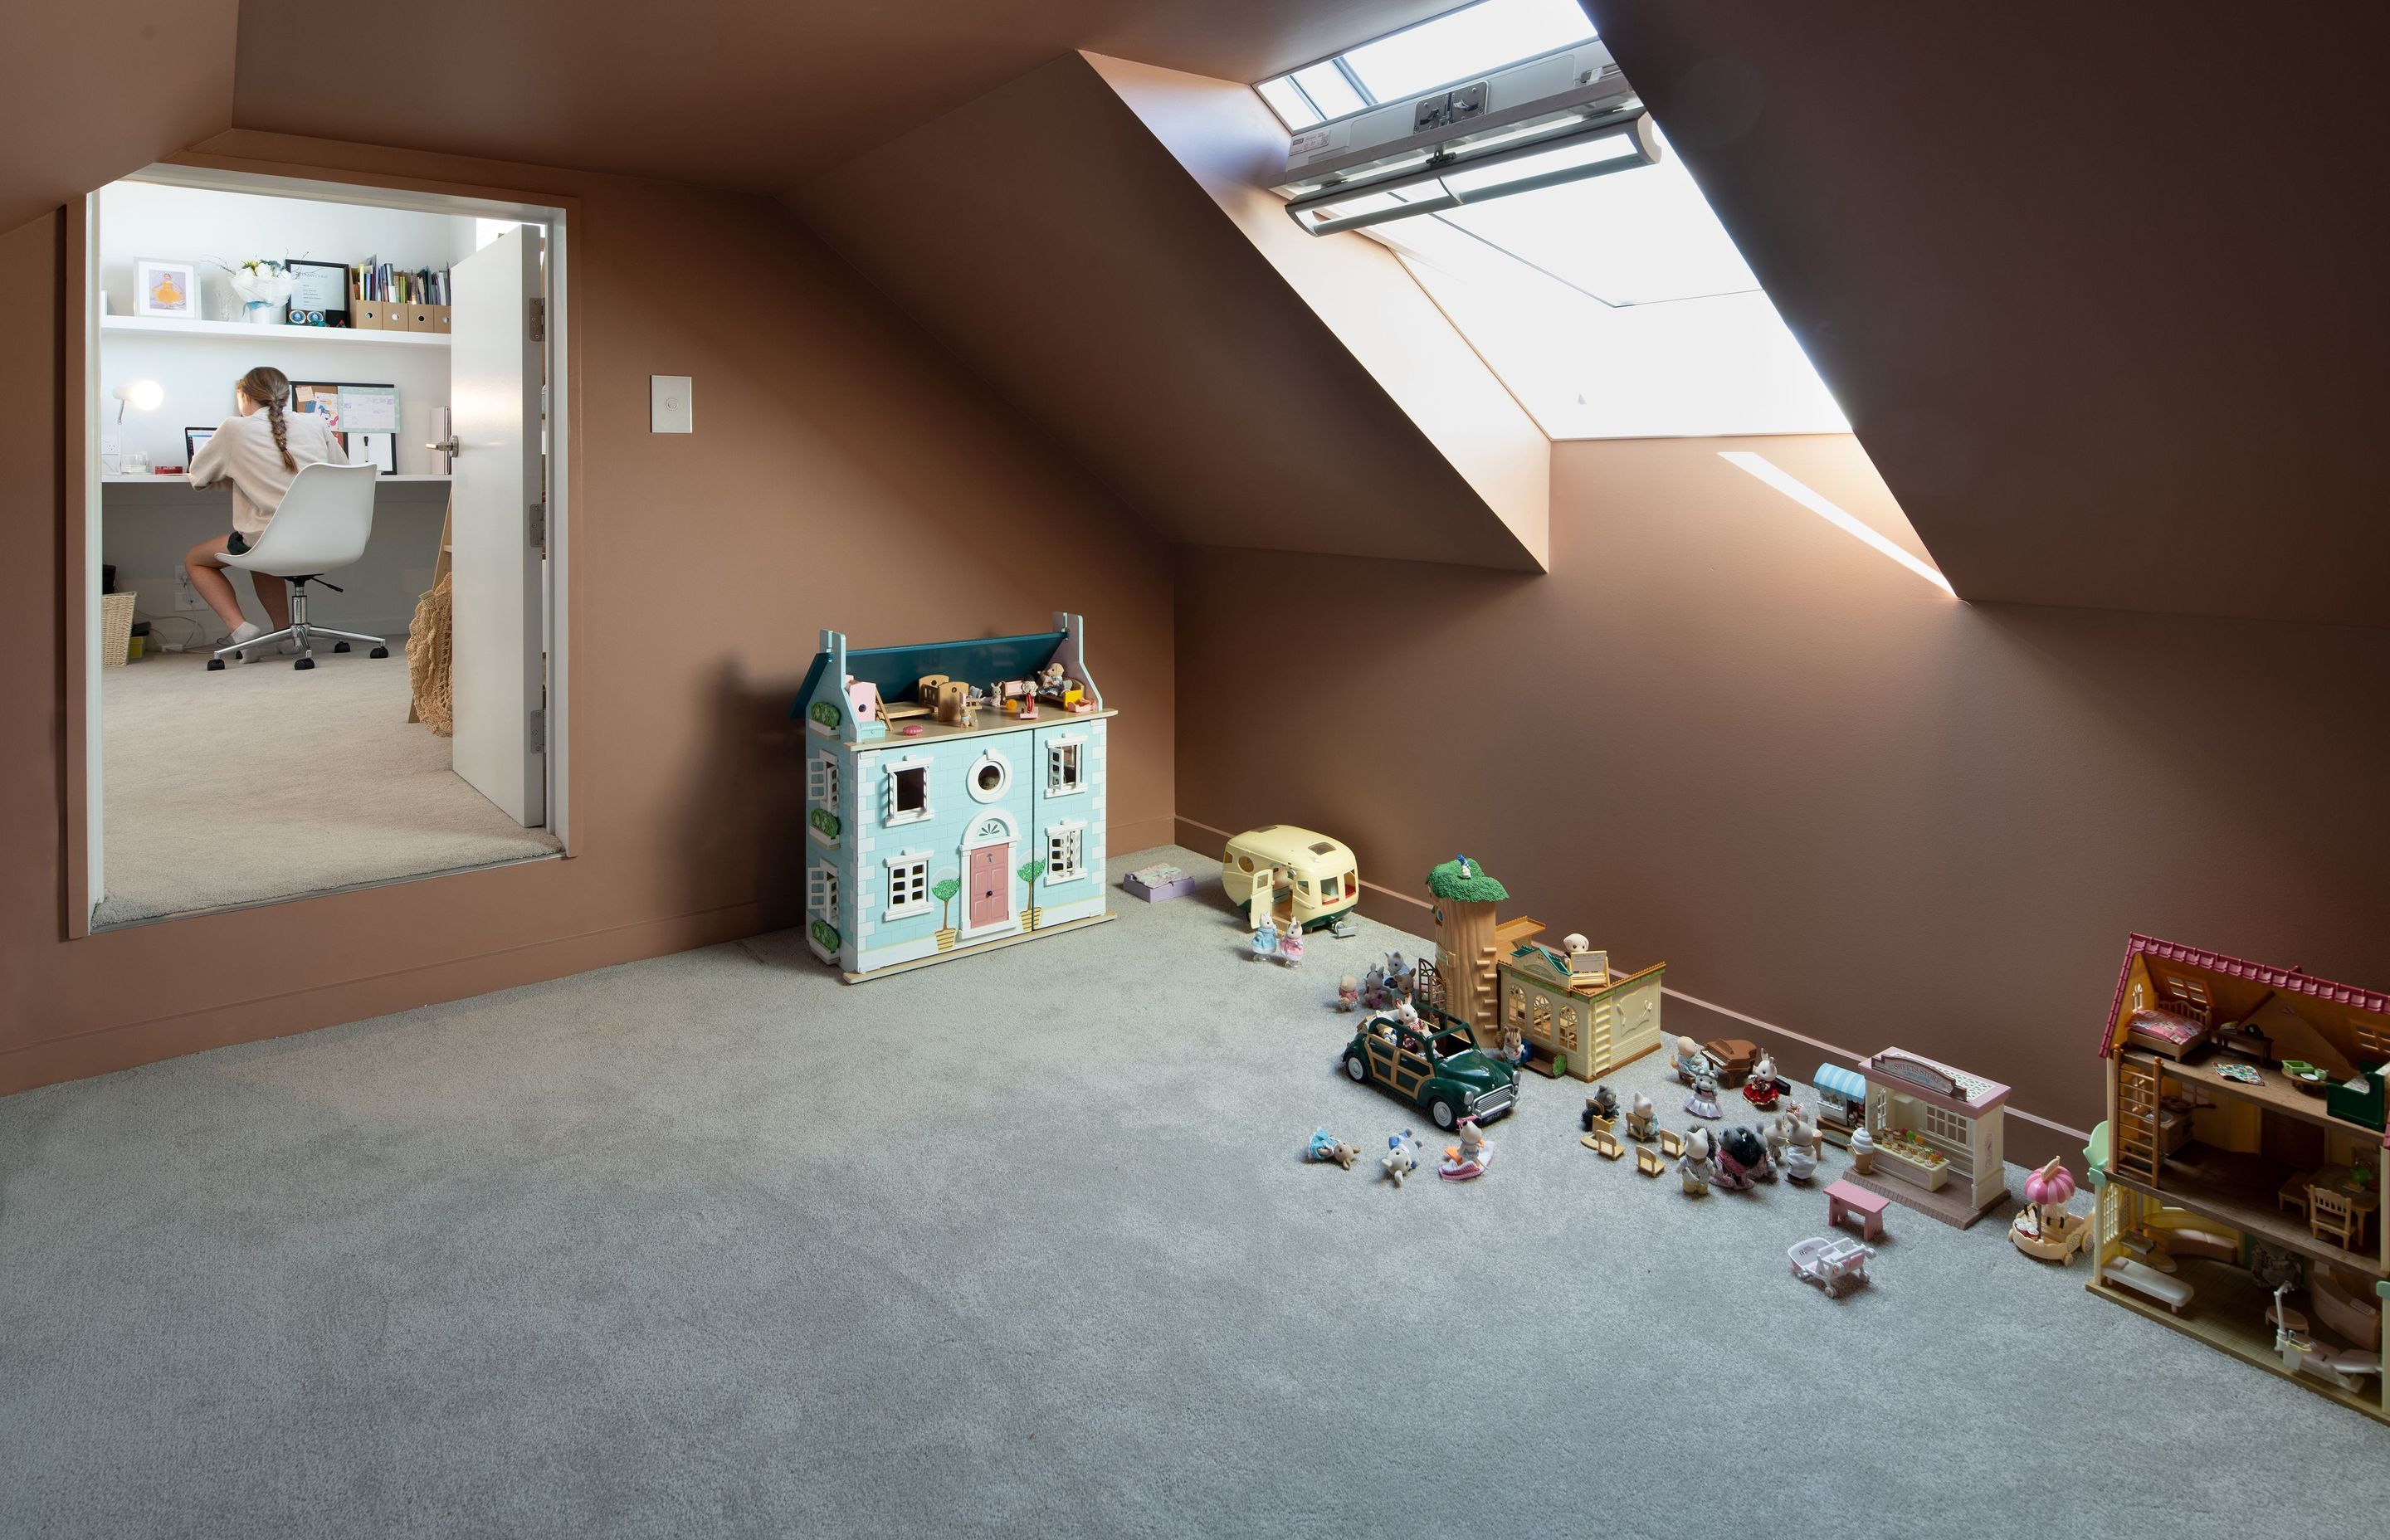 A bedroom opens to a play space above the garage.